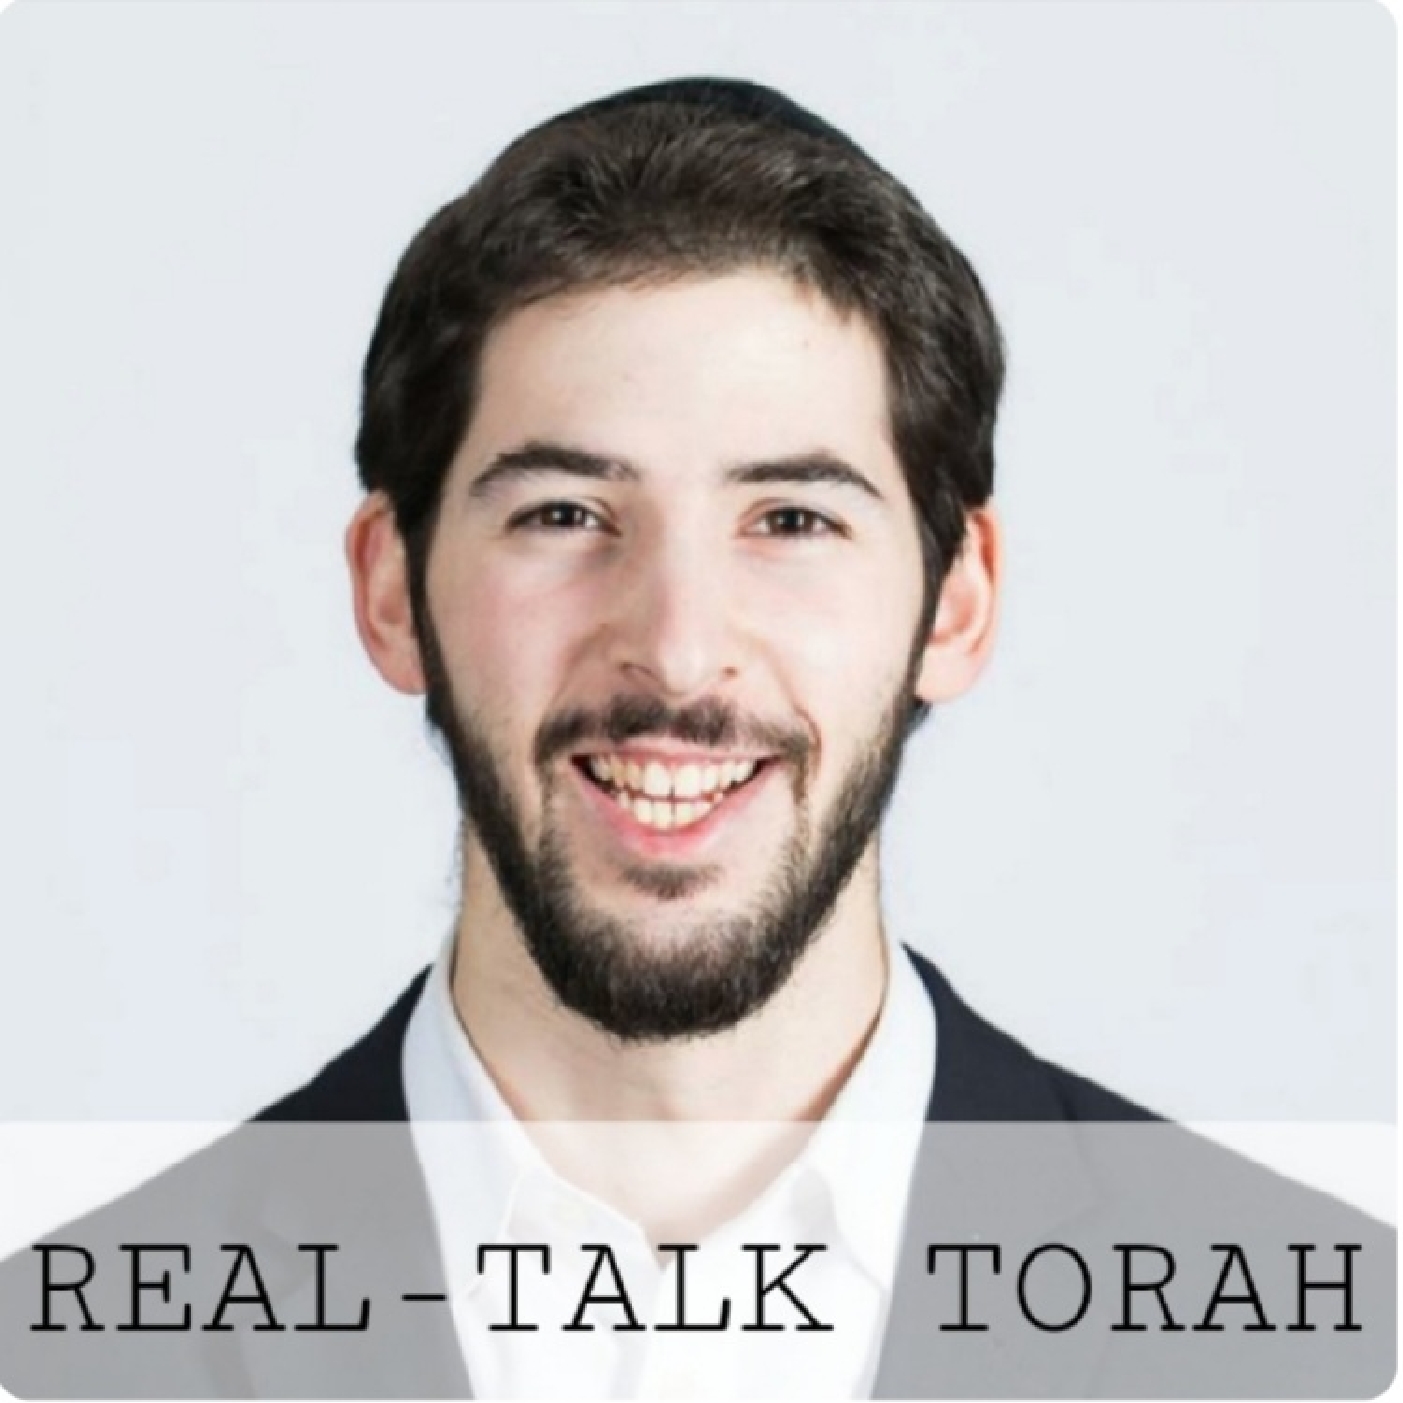 Real-Talk Torah: Dress Codes in Judaism - Why Do We Reference the Bigdei Kehunah after the Haftarah? 👔